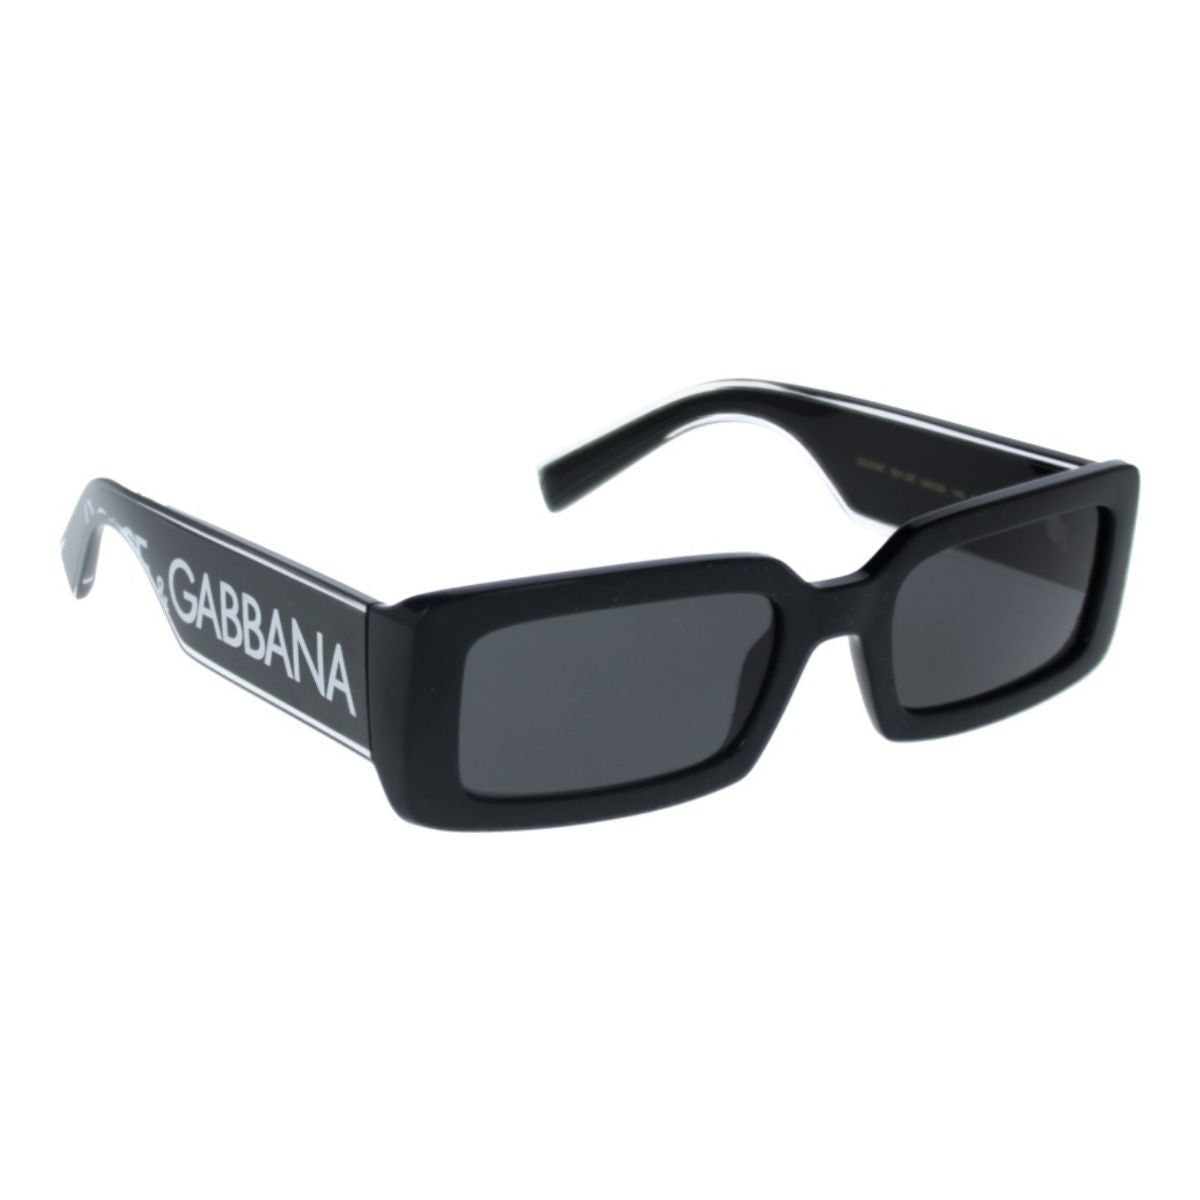 "Fashionable Dolce & Gabbana DG6187 501/87 sunglasses featuring logo on the side, UV protection for men and women."